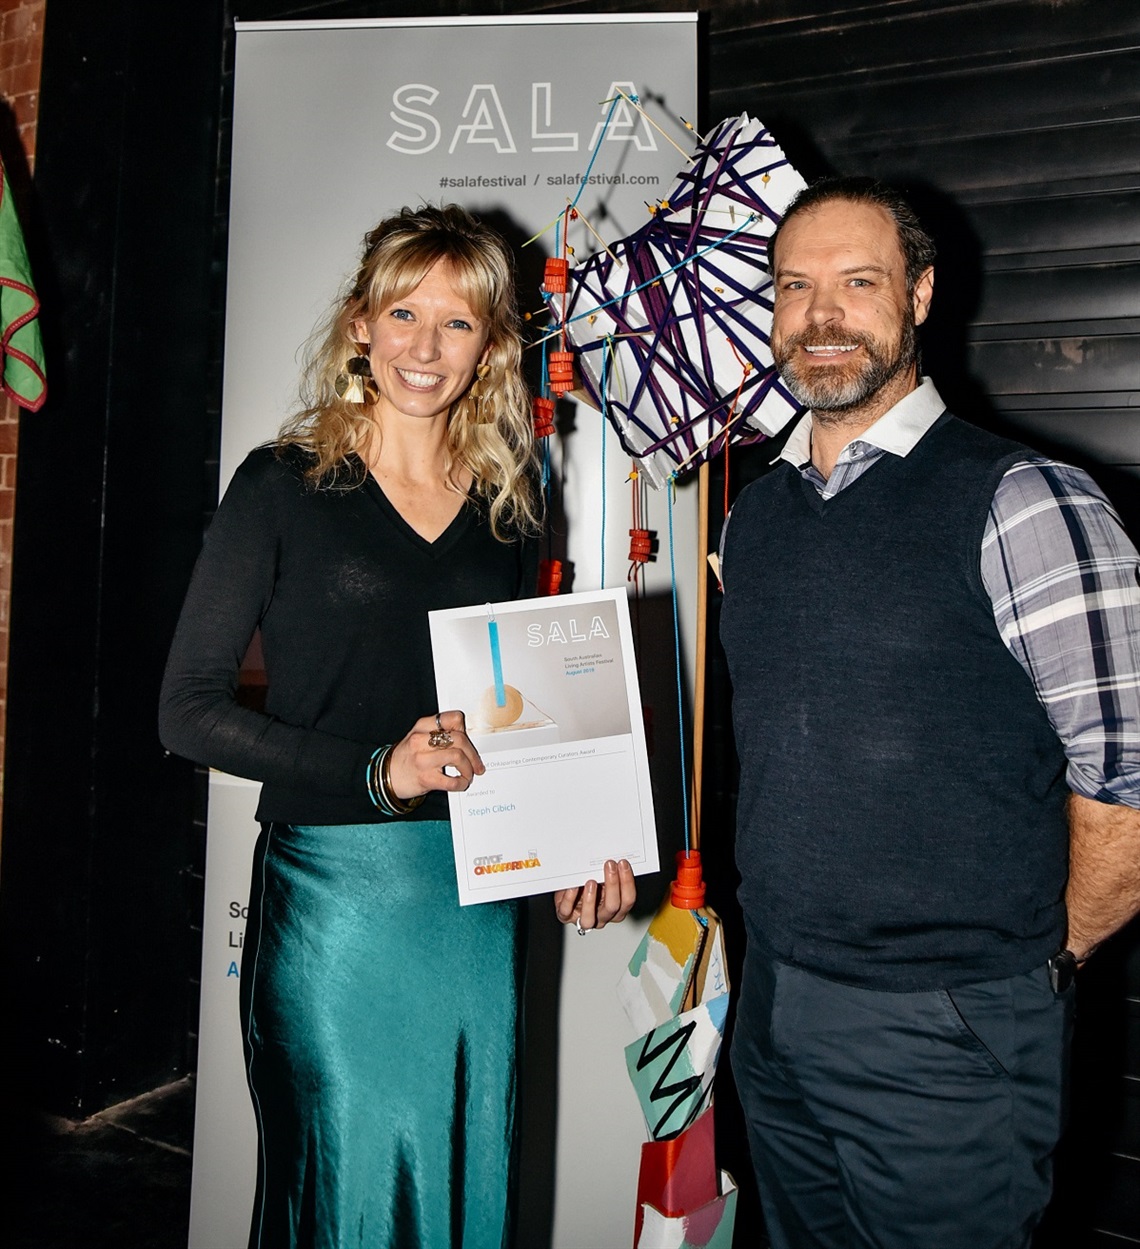 Steph receiving her award from City of Onkaparinga Team Leader, Arts and Events, Jason Haskett. Photo: SALA/Jack Fenby